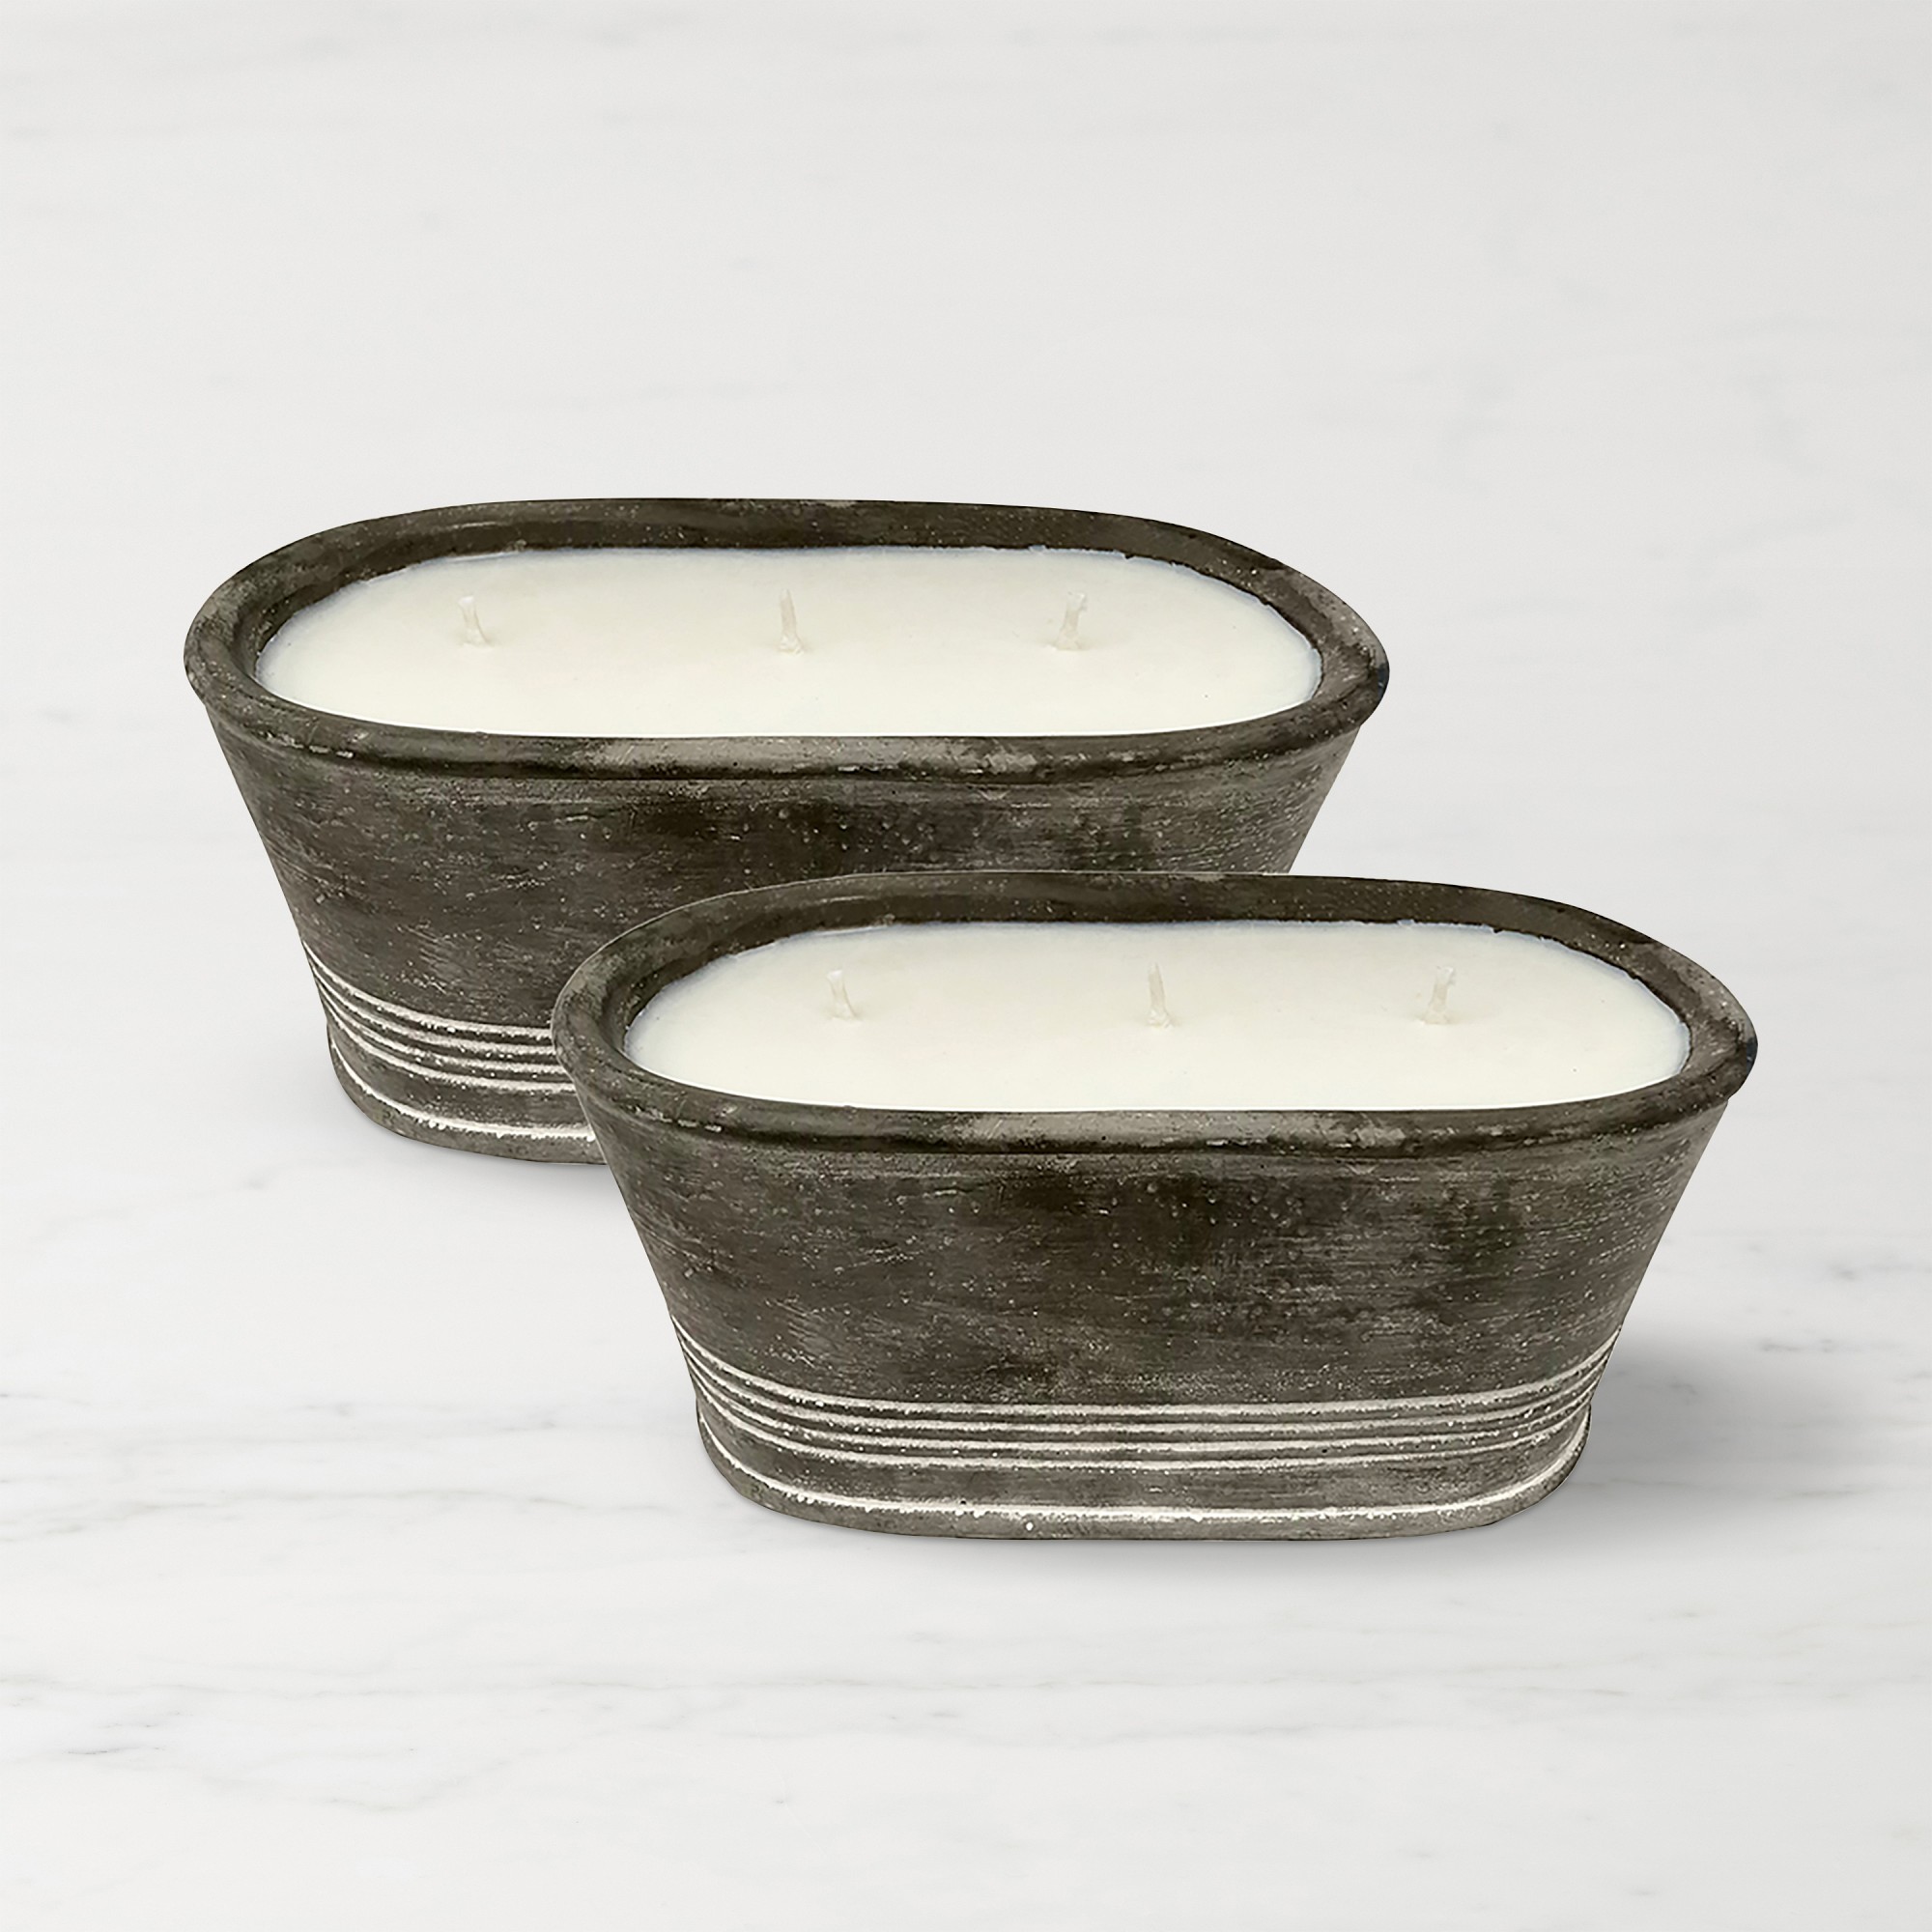 K. Hall 3 Wick Tub Garden Cement Citronella Outdoor Candle, Set of 2